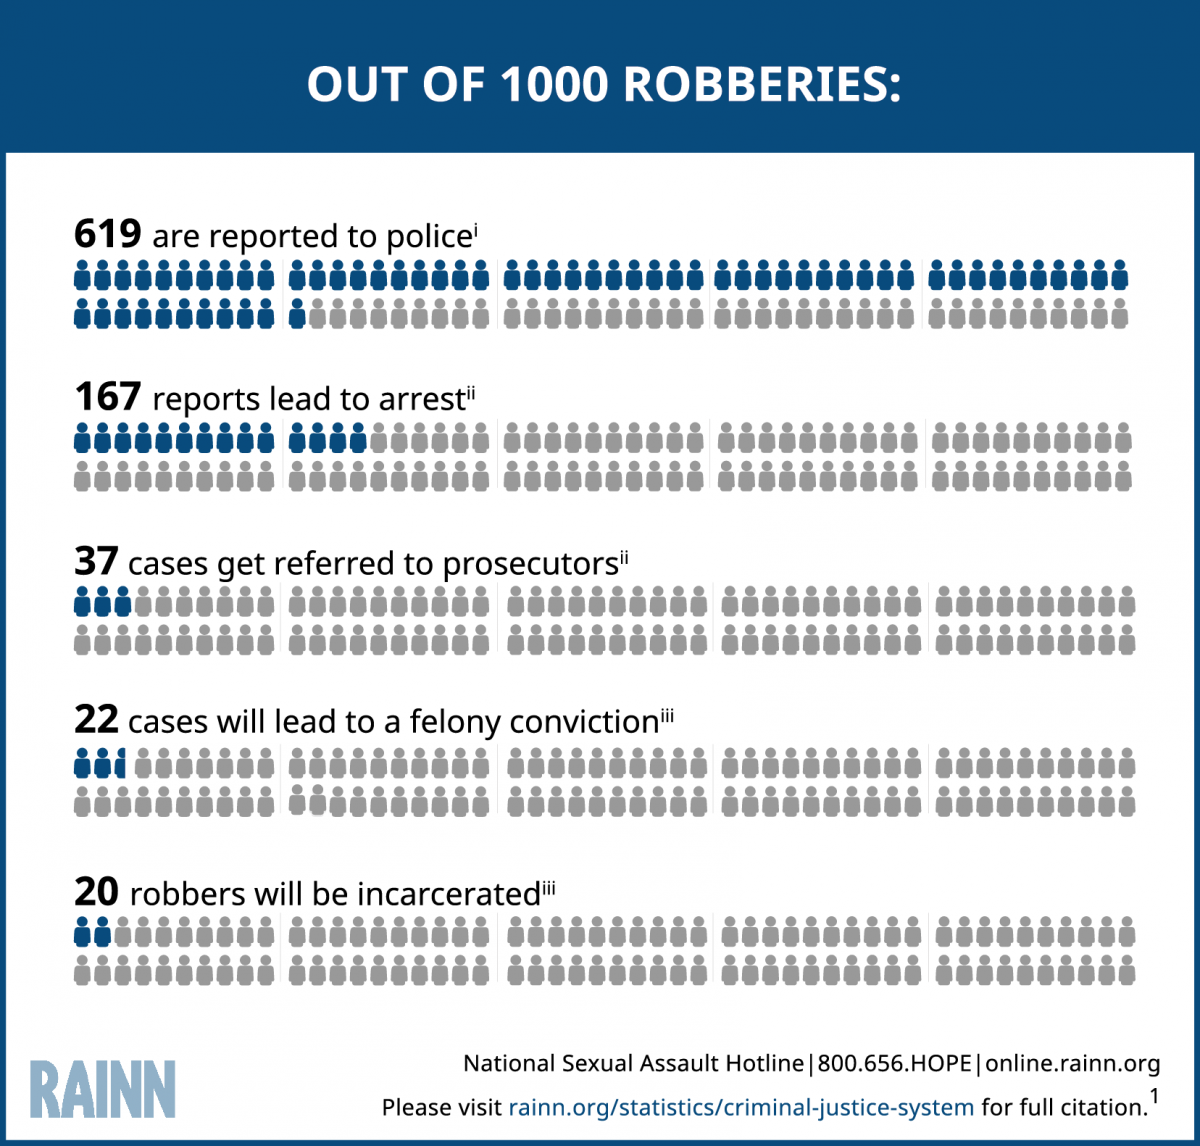 Graphic explaining the number of perpetrators of robbery that will serve jail or prison time. The graphic visually contrasts the much lower jail and prison rates for perpetrators of rape. For every 1,000 robberies, 619 are reported to police, 167 reports lead to arrest, 37 cases get referred to prosecutors, 22 cases will lead to a felony conviction, and 20 robbers will be incarcerated. 